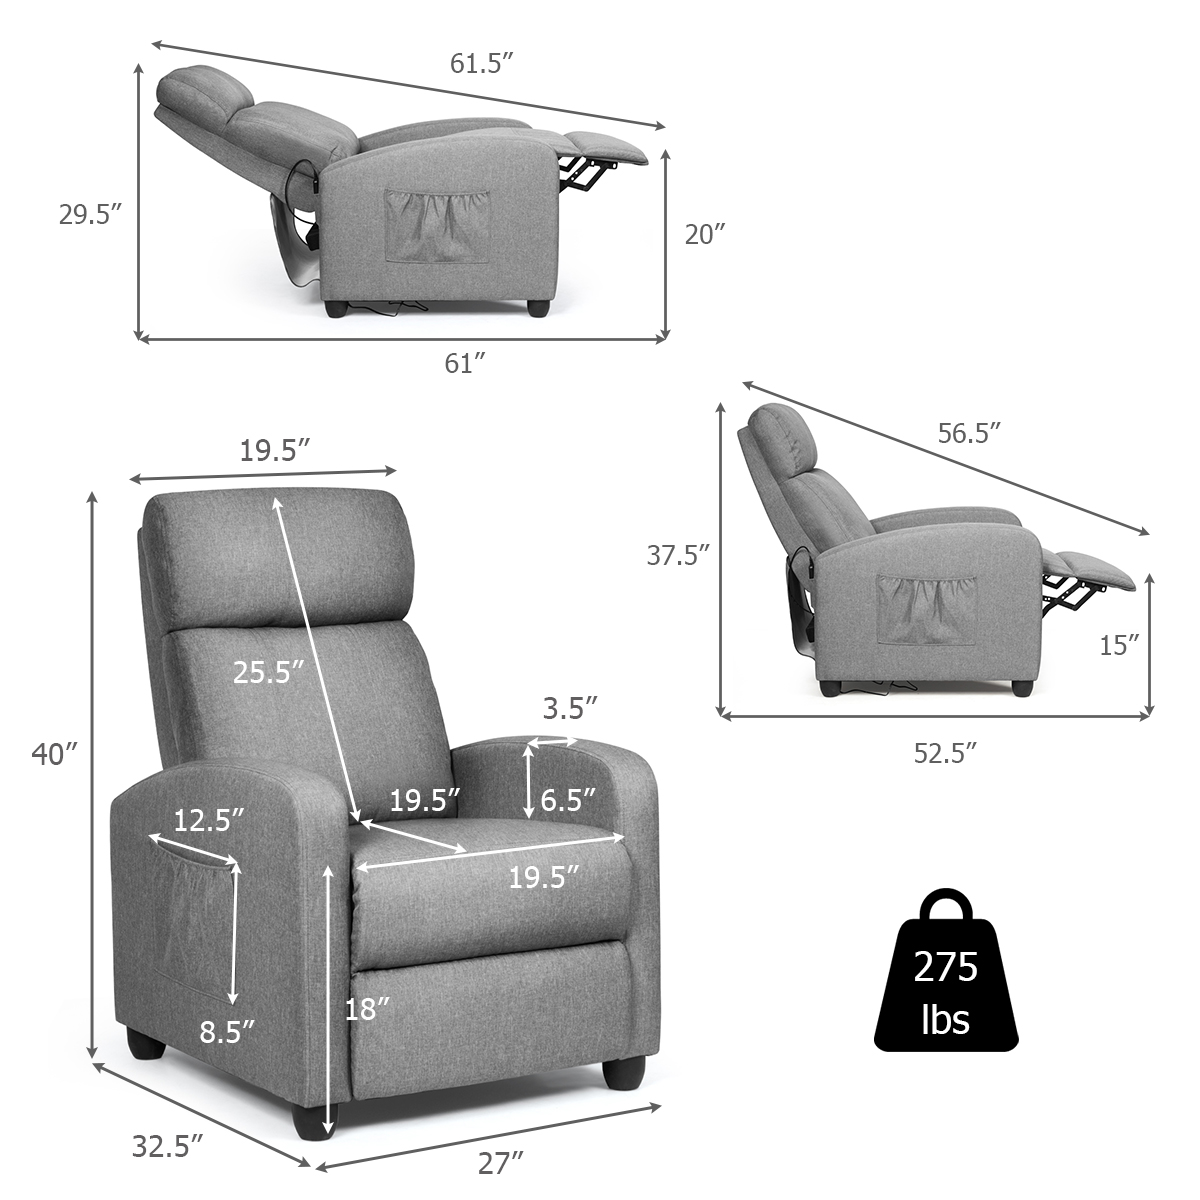 Costway Recliner Massage Chair, Ergonomic Adjustable Single Sofa with Padded Seat Grey